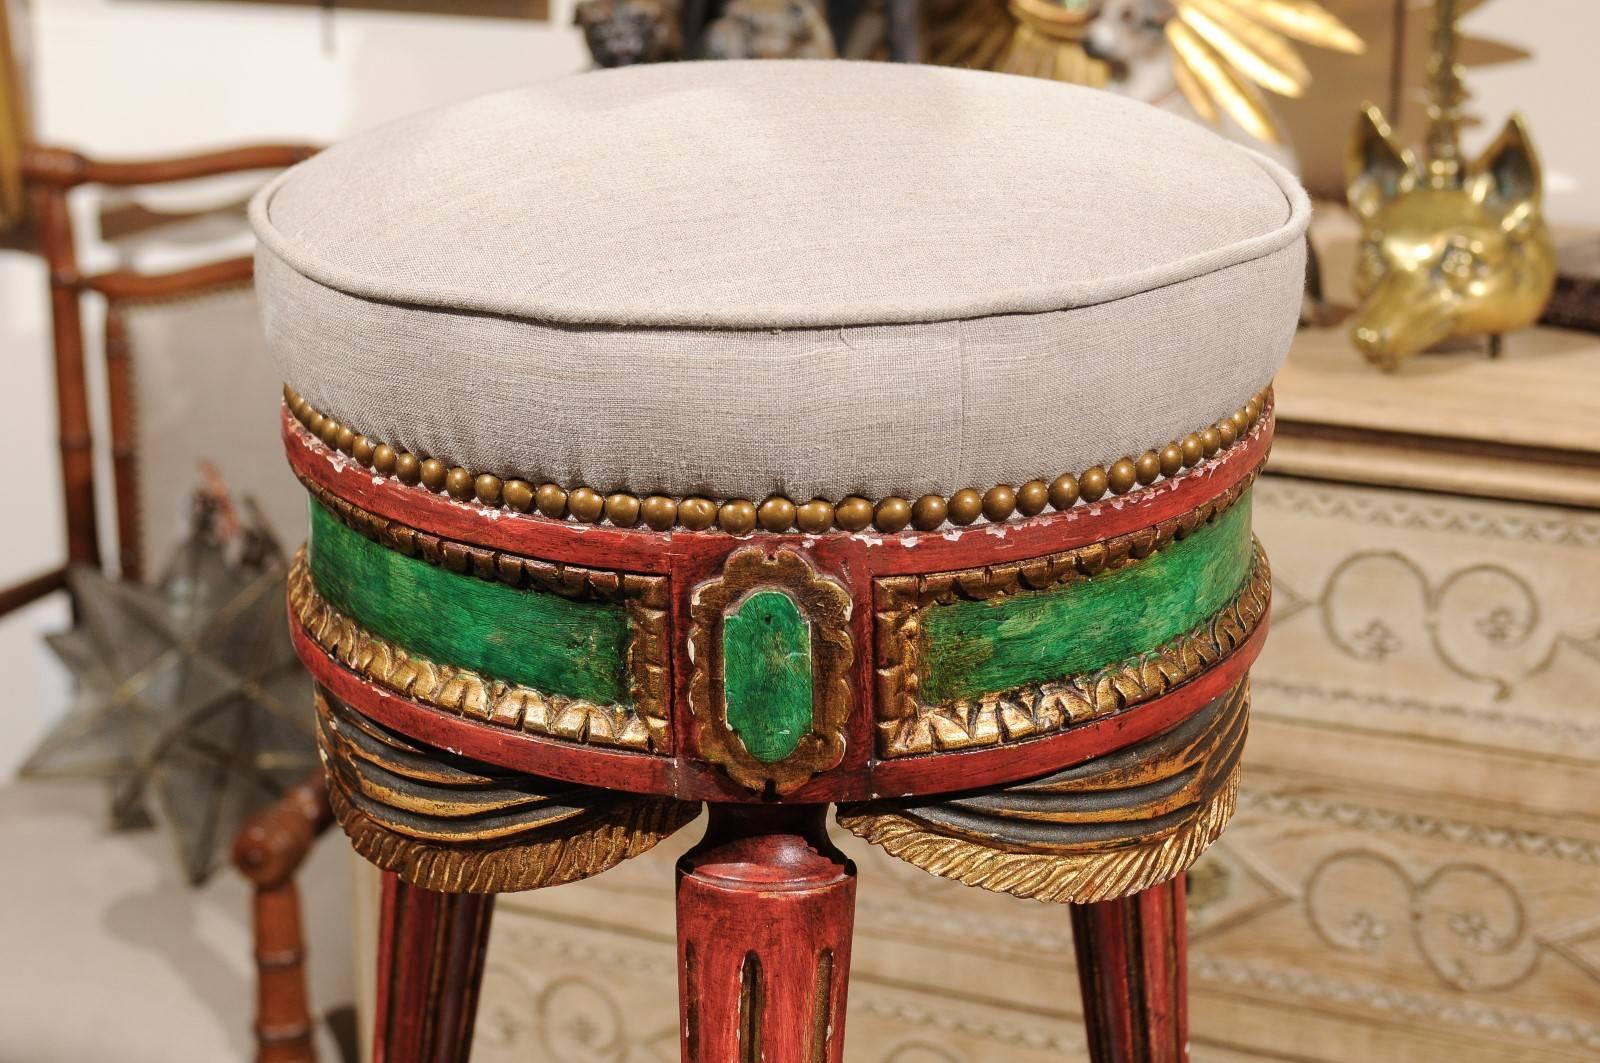 Venetian Red and Green Painted Wood Upholstered Stool with Gilt Accents 2